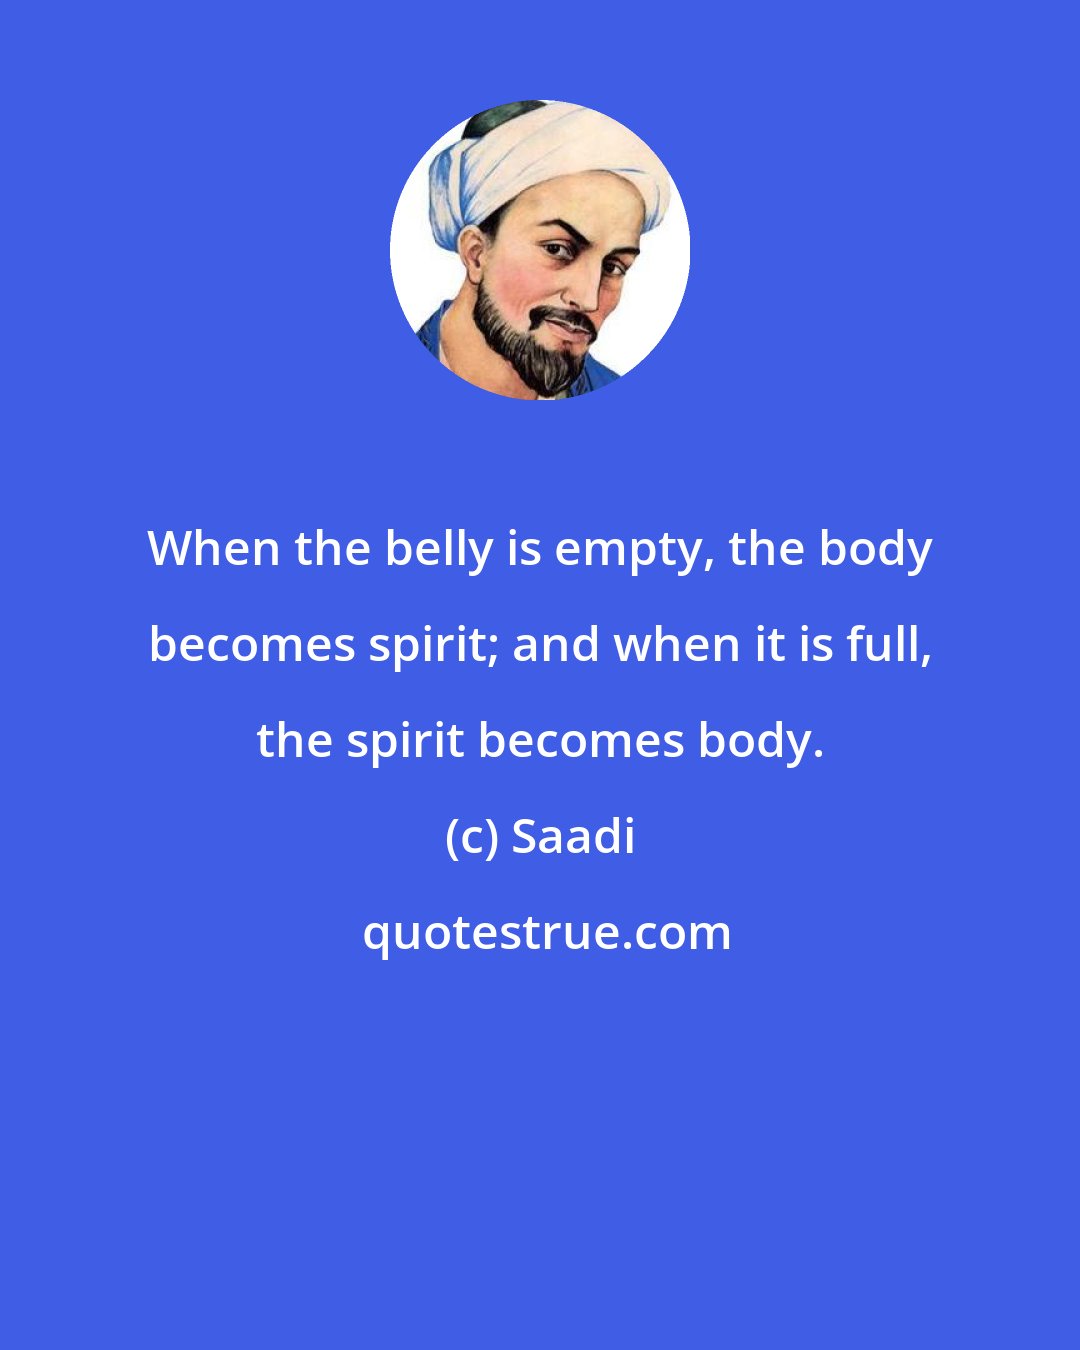 Saadi: When the belly is empty, the body becomes spirit; and when it is full, the spirit becomes body.